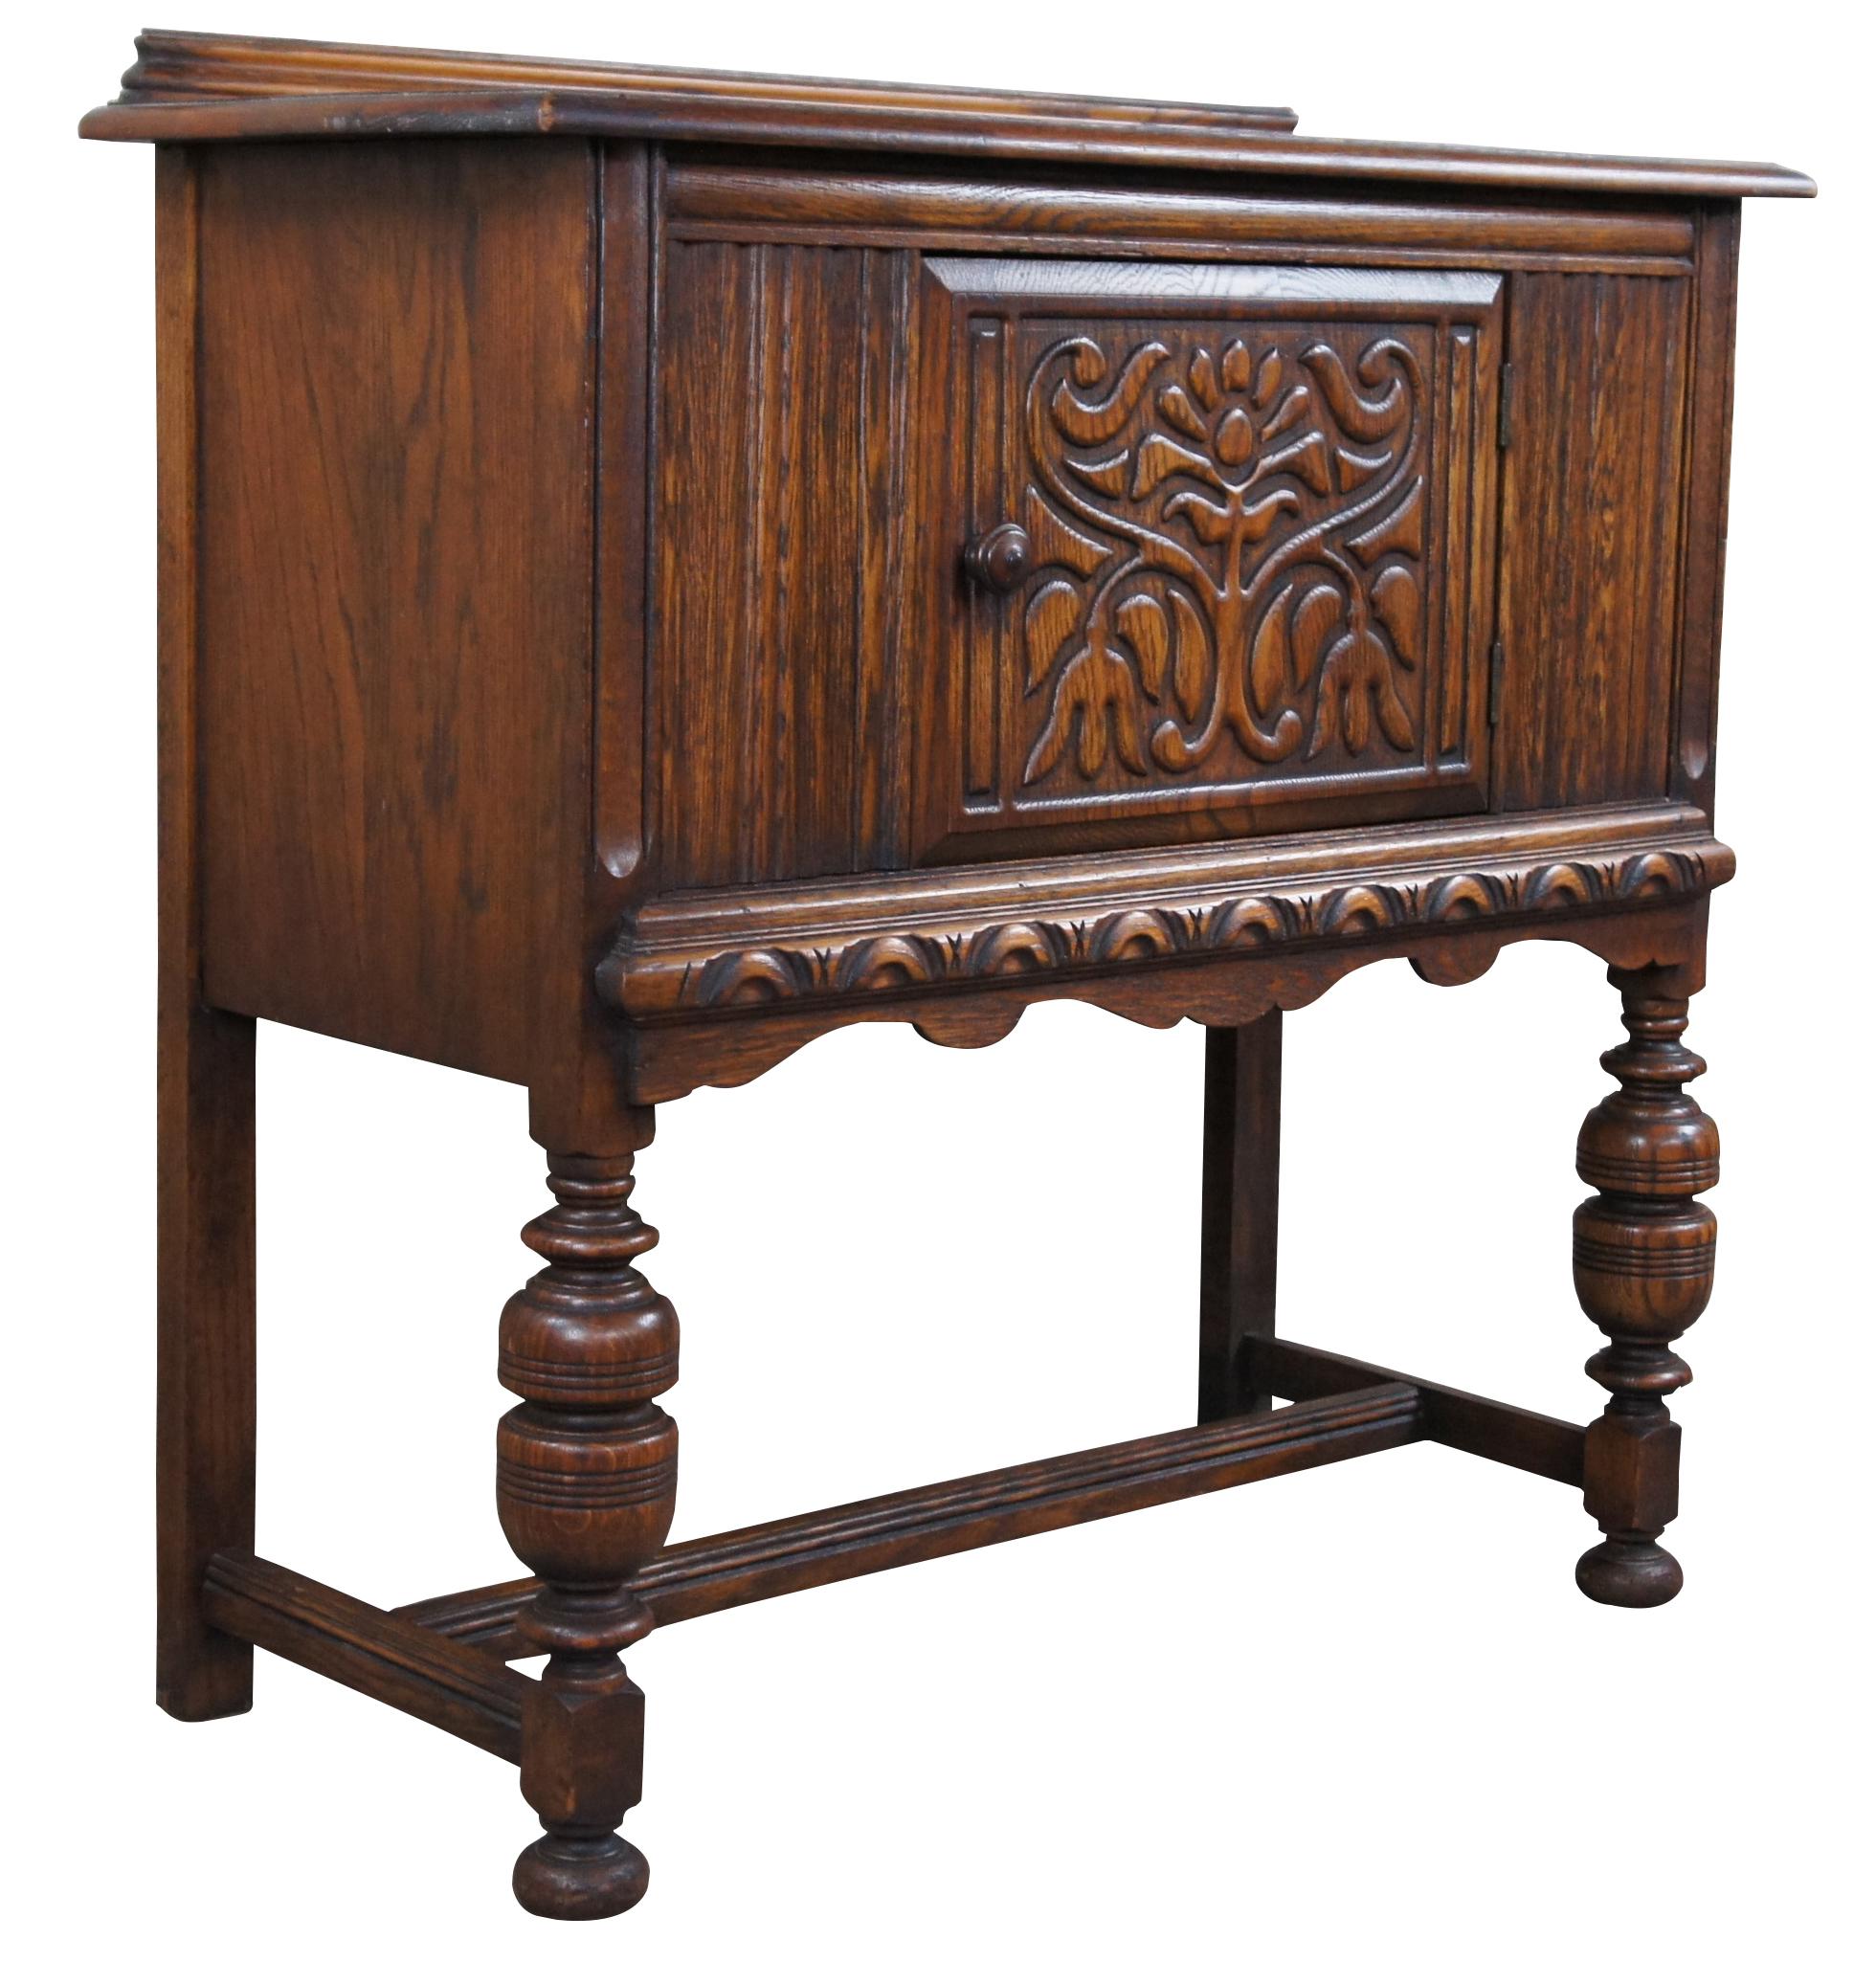 Early 20th century Jacobean / Elizabethan revival buffet or server. A rectangular form Made from oak with a carved central cabinet above a serpentine apron, turned baluster supports and bun feet connected by an H stretcher.
Measure: 36